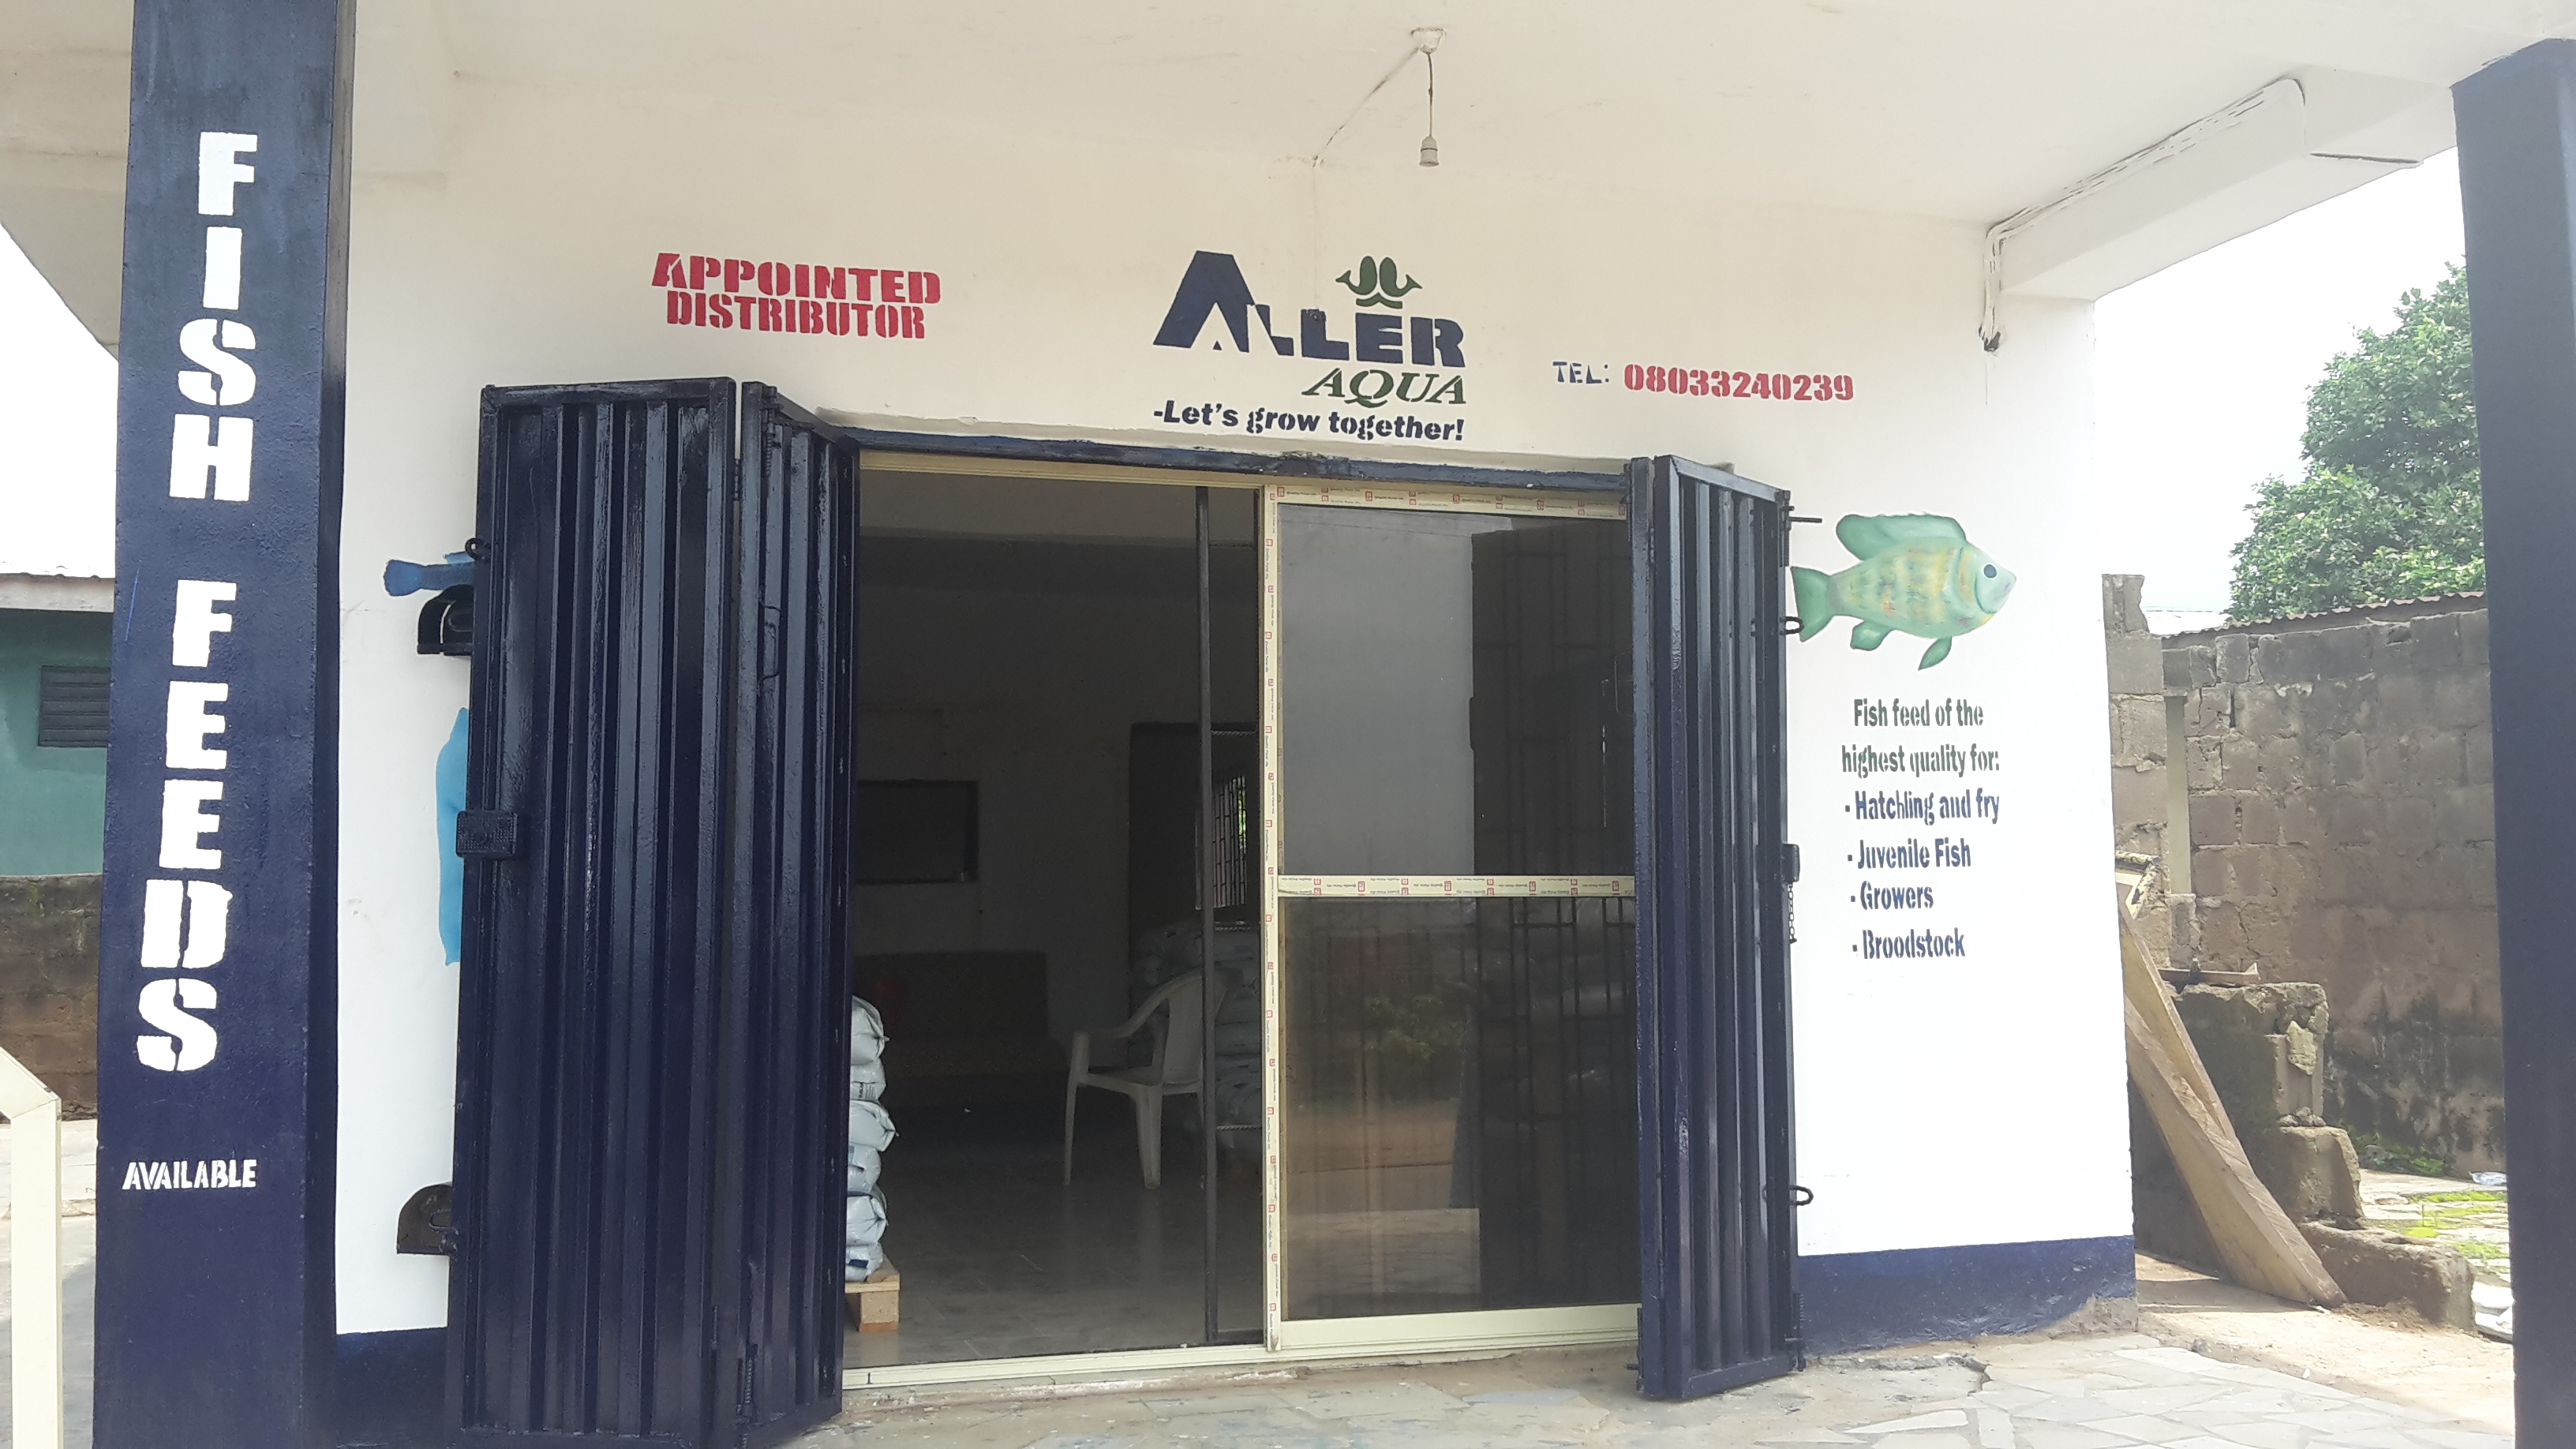 Aller Aqua Nigeria - Appointed distributor of fish feed for Aquaculture